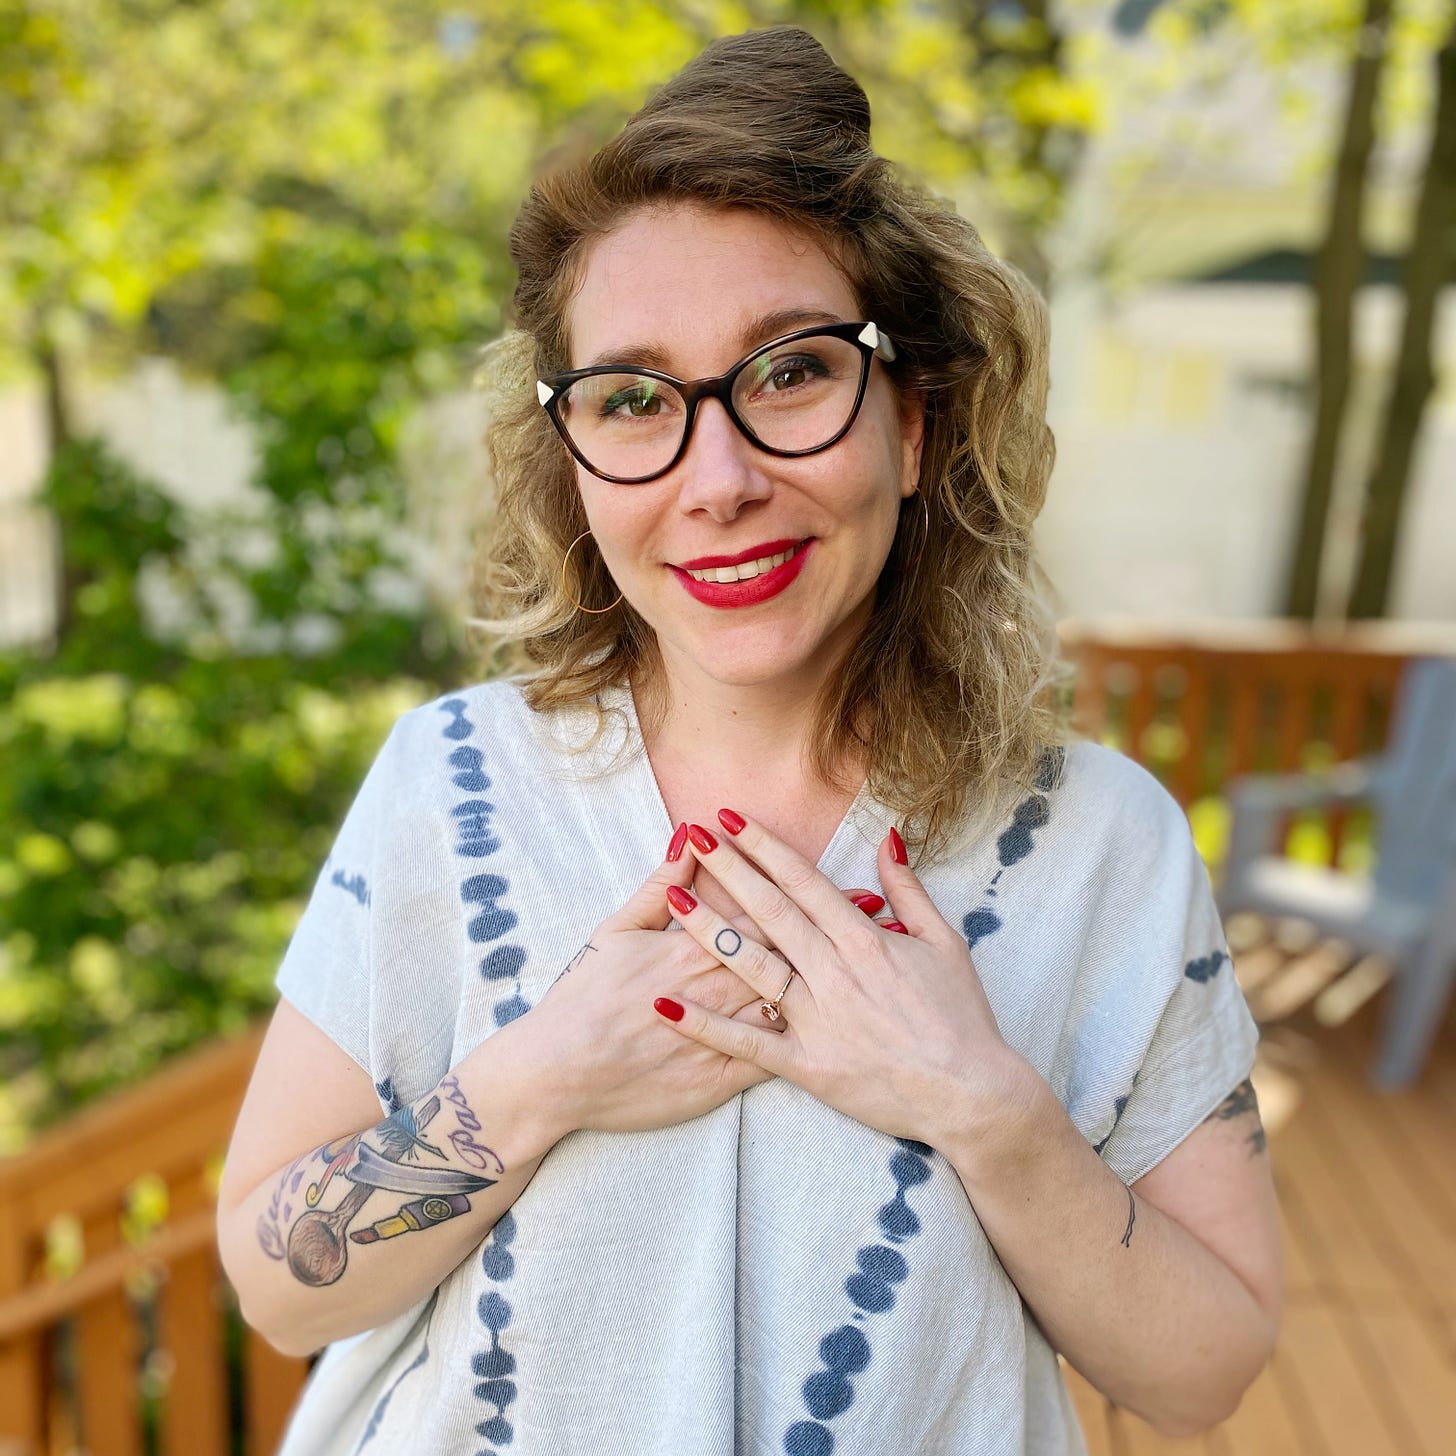 Dr. Kate is smiling at the camera. She is a white woman with red and blonde hair wearing a light blue shirt with dark blue died spots. She is wearing glasses, red lipstick, and red nails.